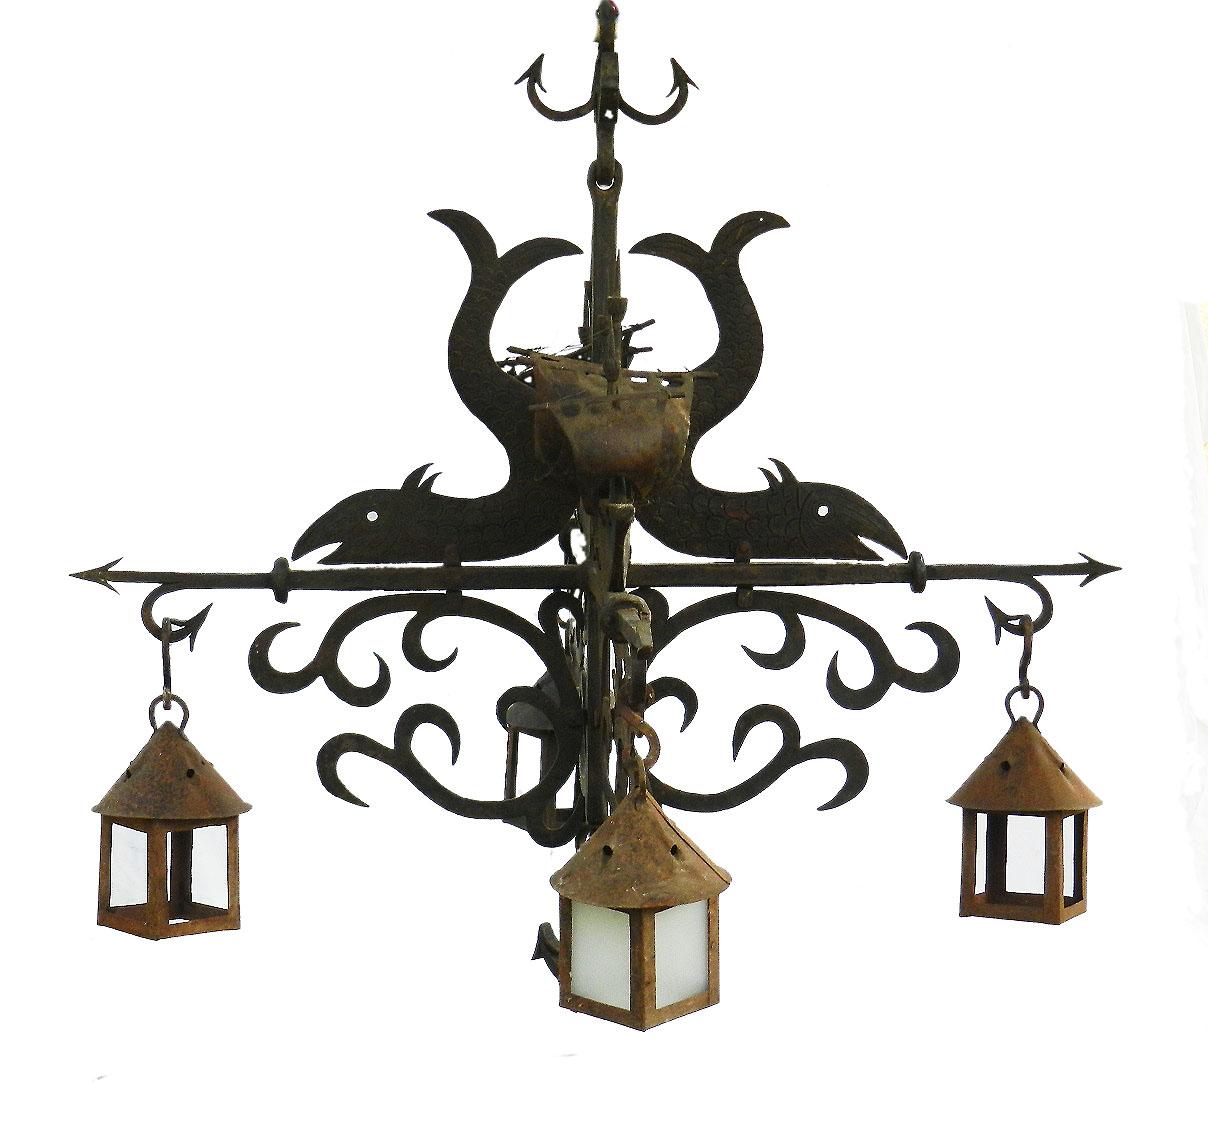 Wrought iron chandelier one of a kind attributed to Gilbert Poillerat, circa 1930 with matching pair of Sconces wall lights
Rare and unique 
With Arts & Crafts Neo Baroque influences typical in works by Poillerat
Hand forged chandelier sculpture